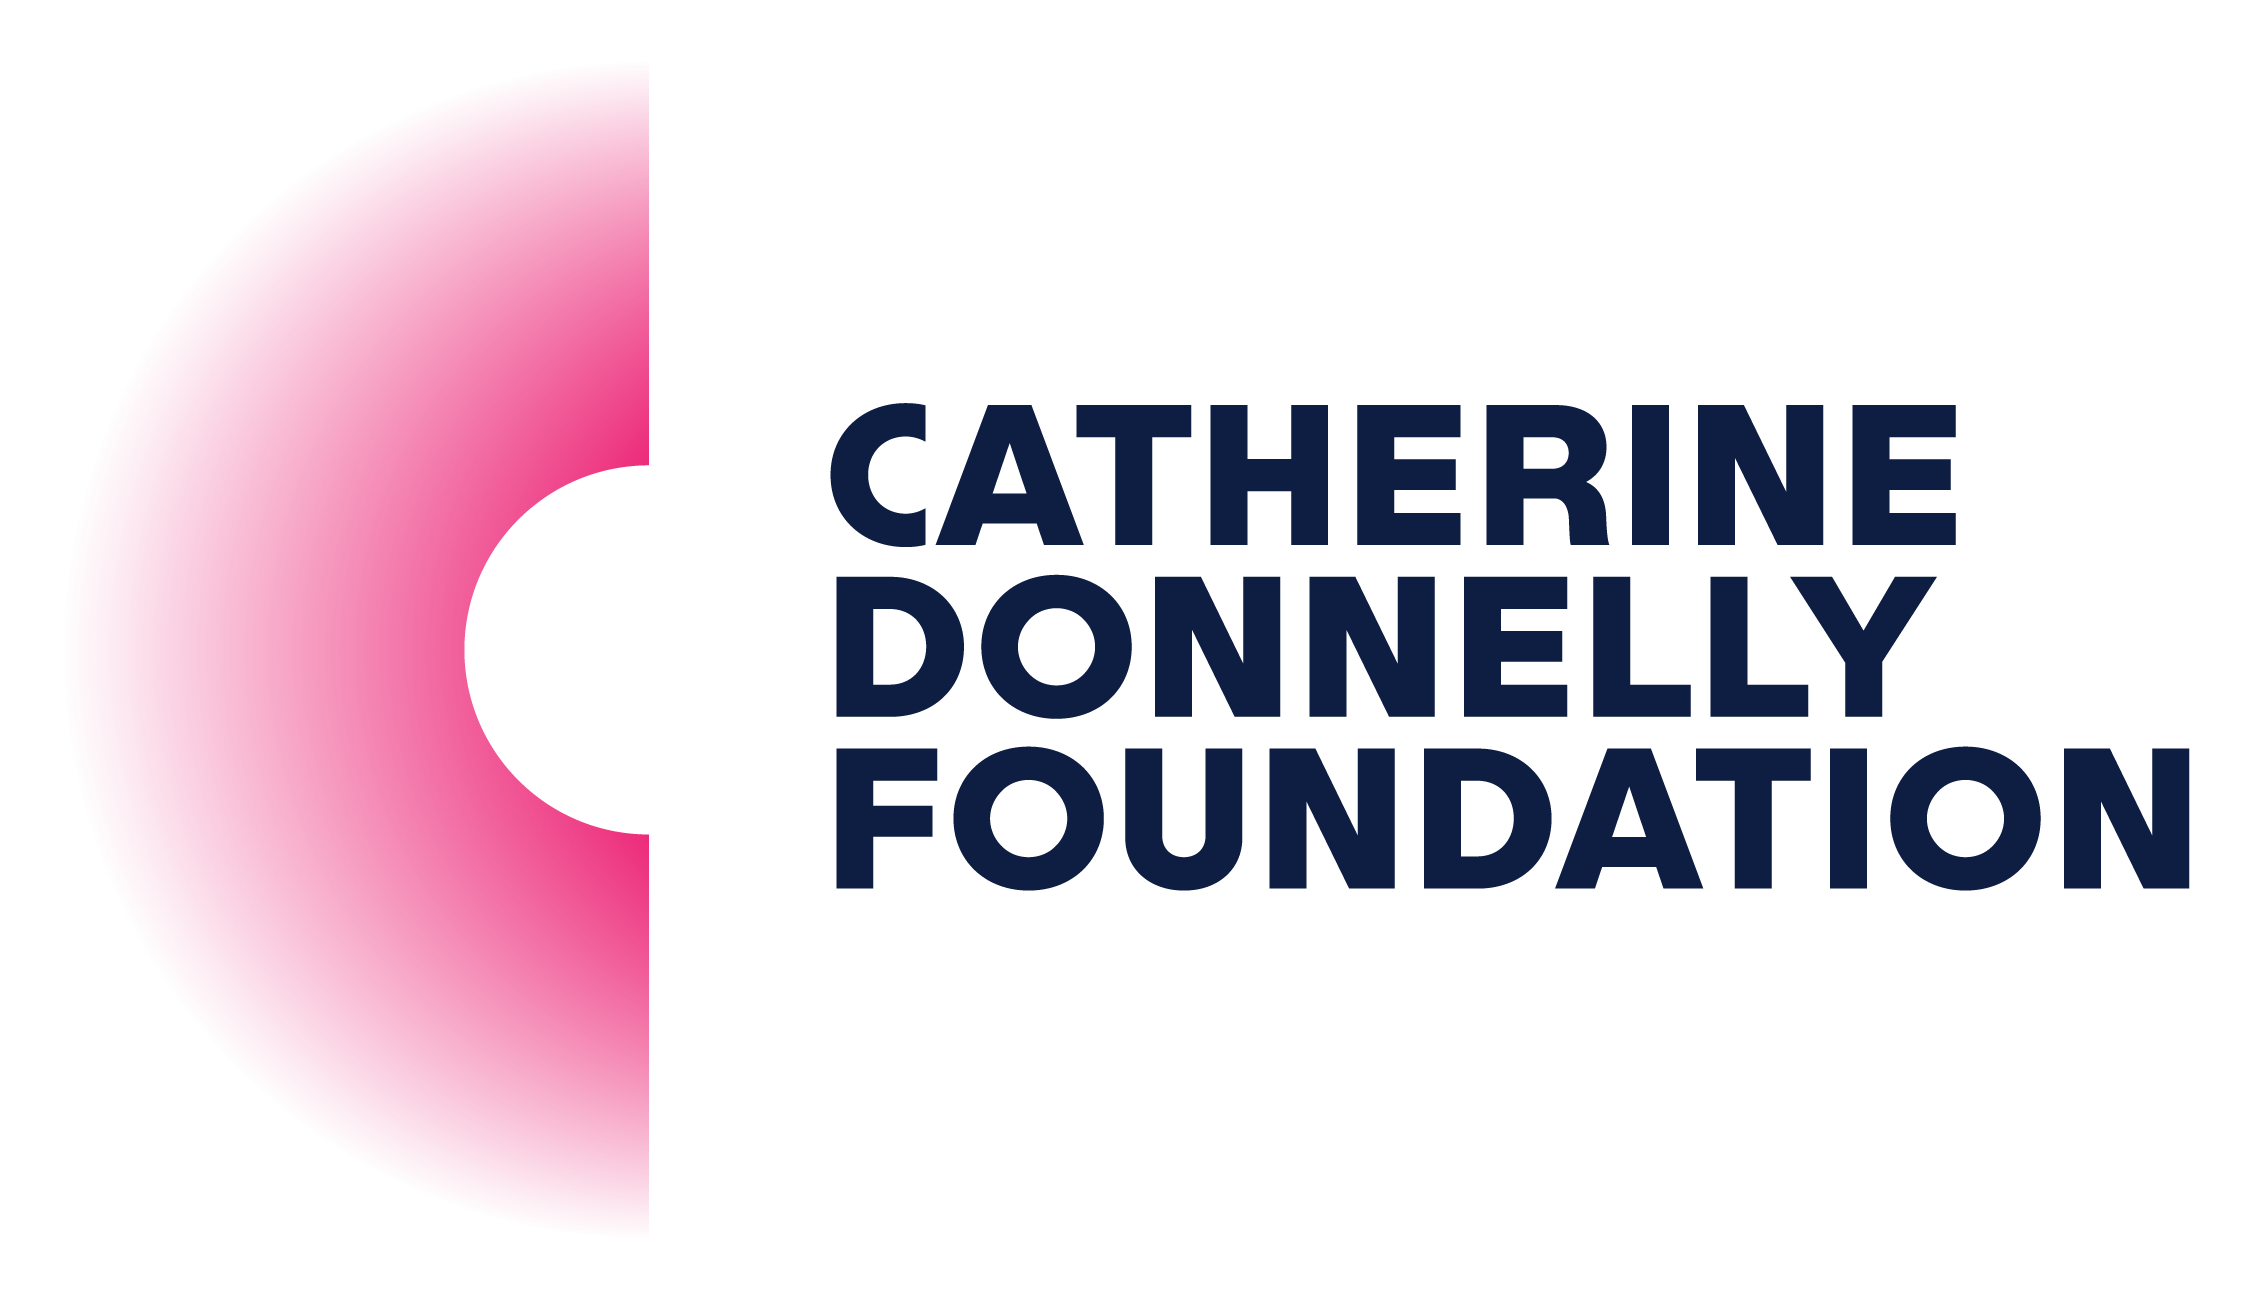 Catherine Donnelly Foundation's logo